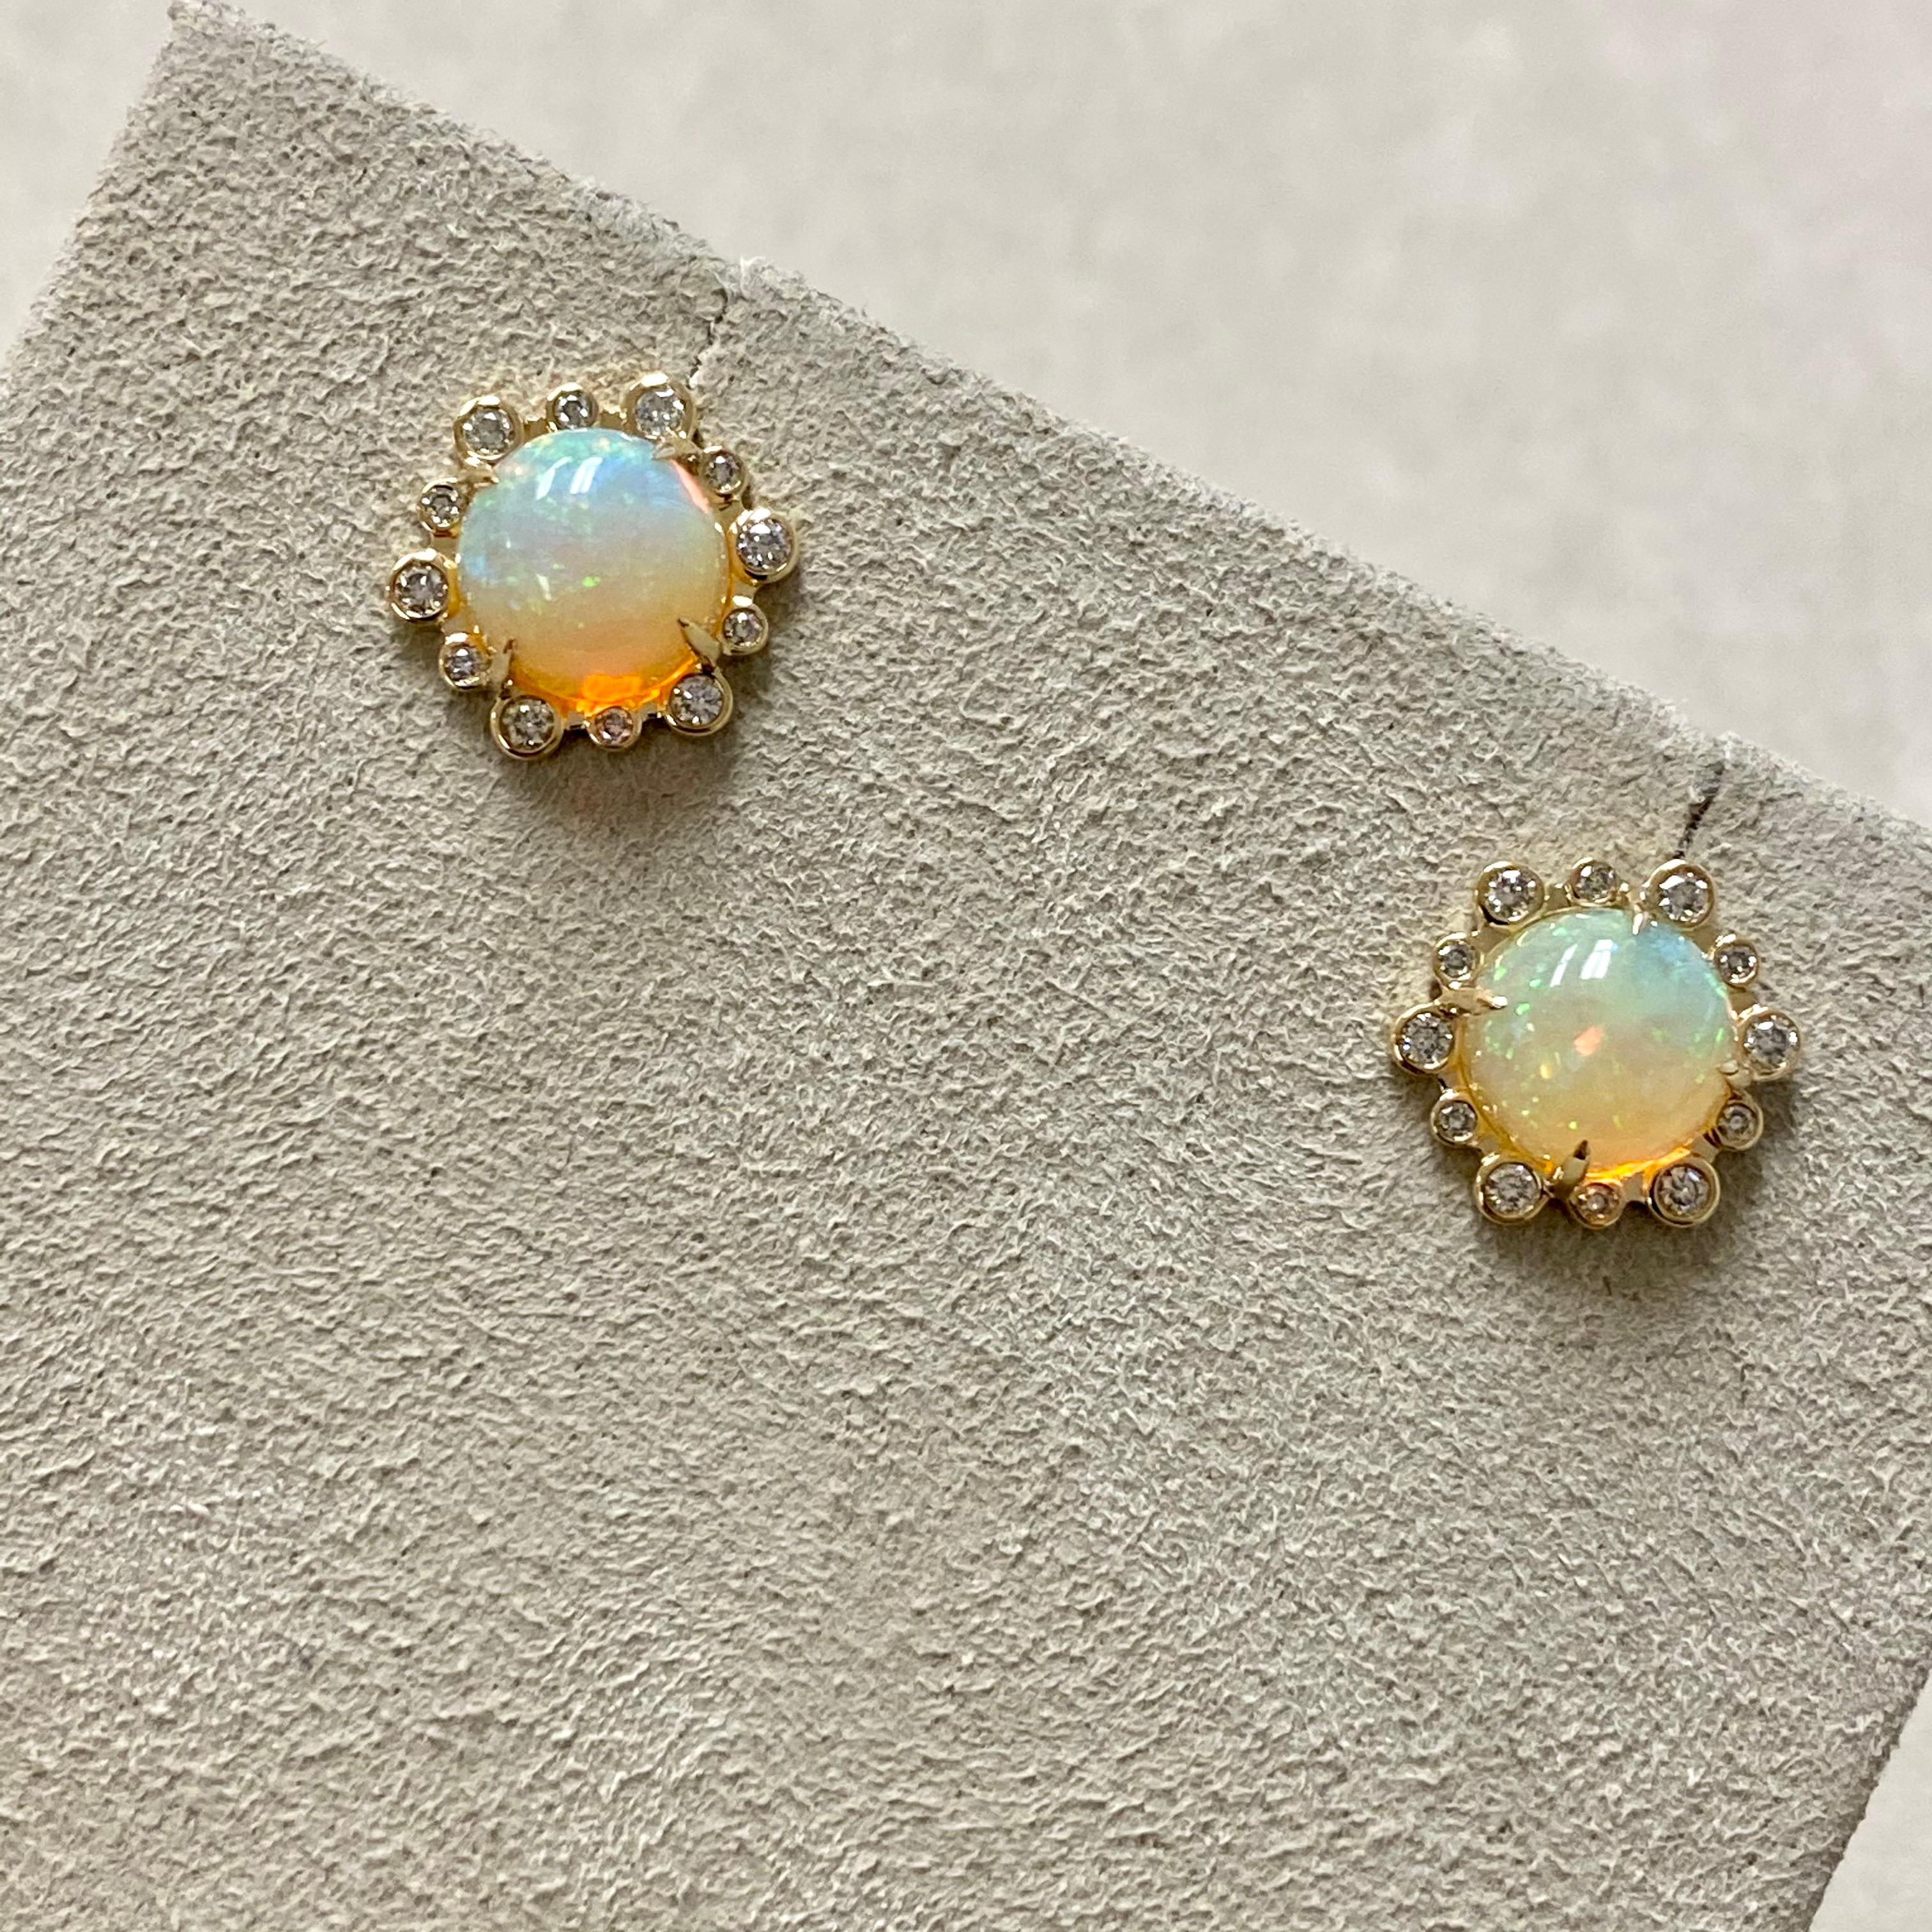 Created in 18 karat yellow gold
Opal 3 carats approx.
Diamonds 0.25 carat approx.
18 karat yellow gold butterfly backs
Limited edition

Adorn yourself in the beauty of these exquisite Candy Blue Topaz and Moon Quartz Earrings, crafted with 18 karat